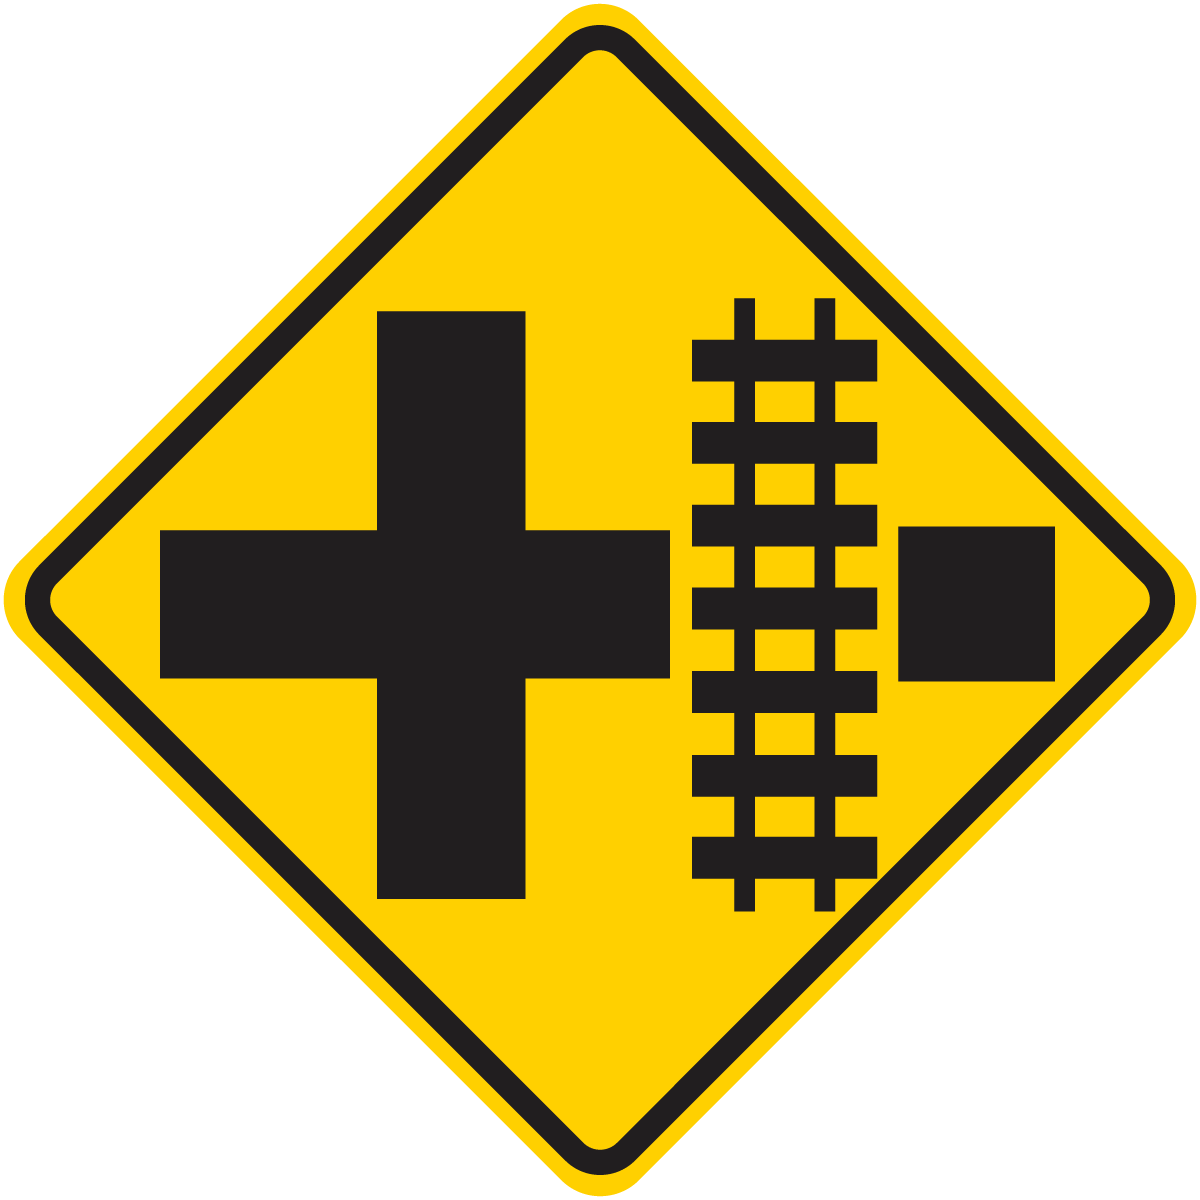 W10-2 	Railroad Crossing (On Crossroad) (Left or Right)